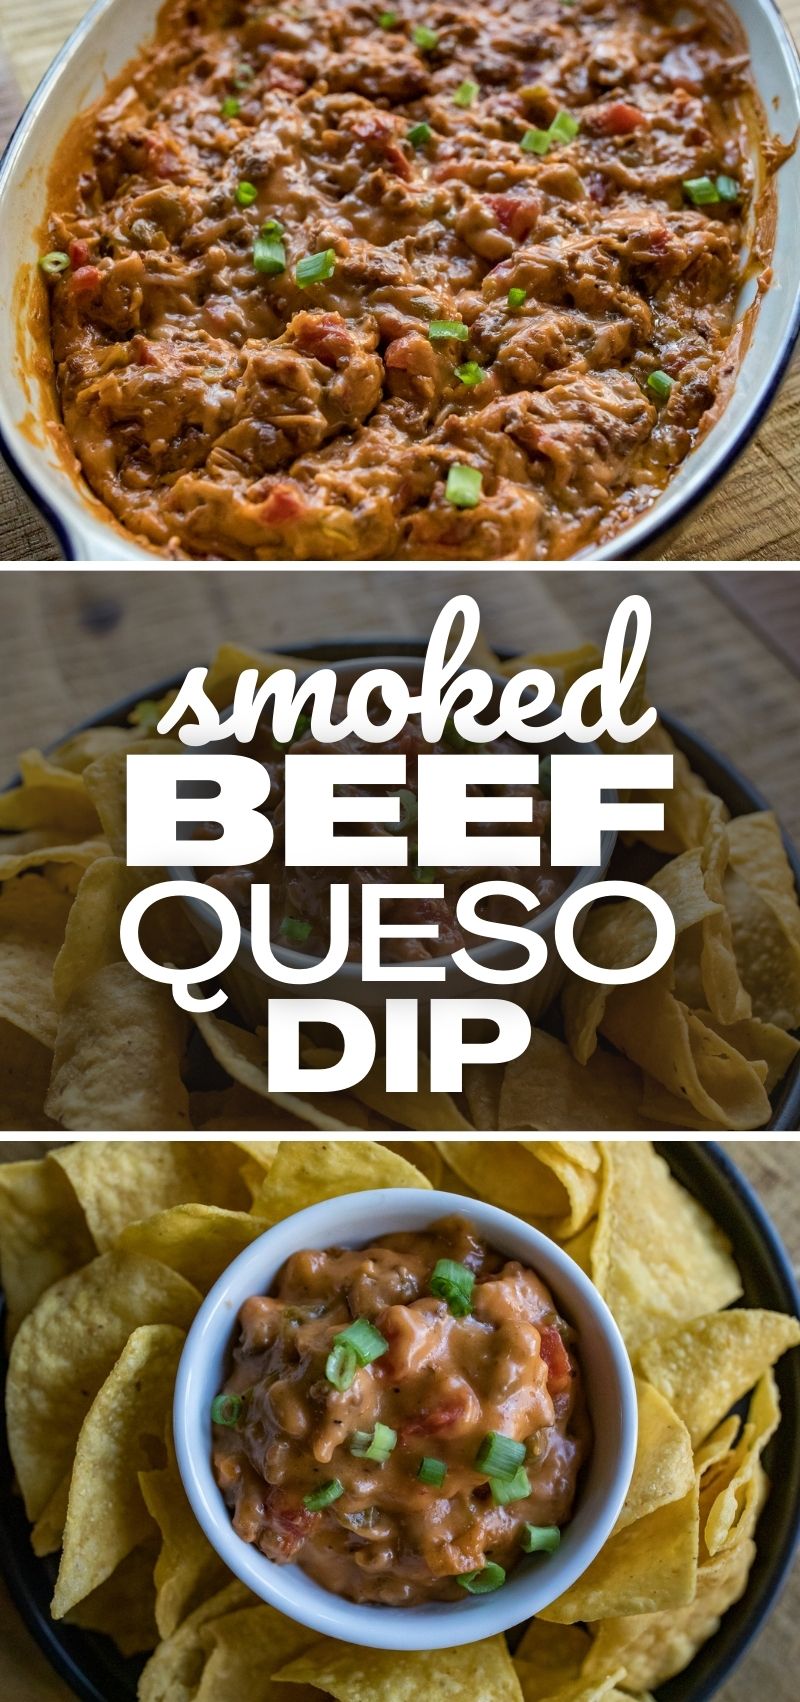 Smoked Beef Queso Dip